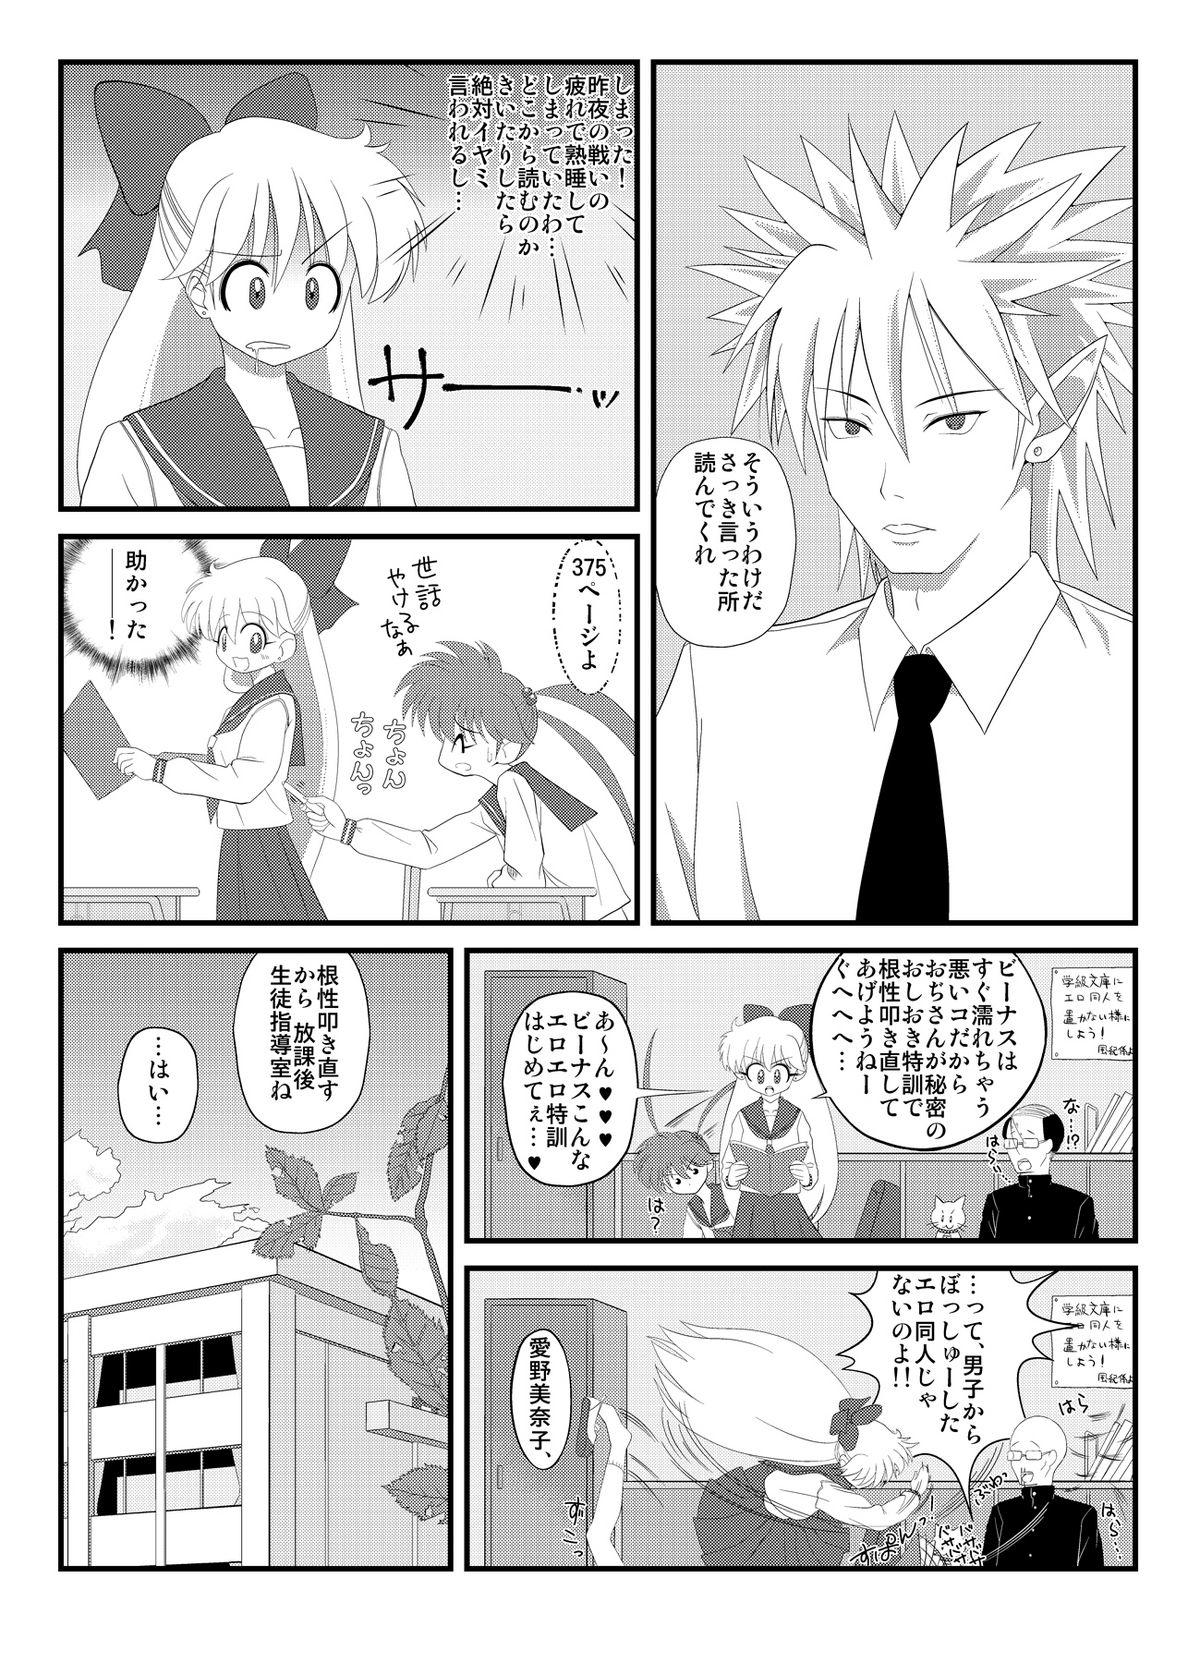 Exhibitionist 先生と美奈子の秘密特訓 - Sailor moon Guyonshemale - Page 9